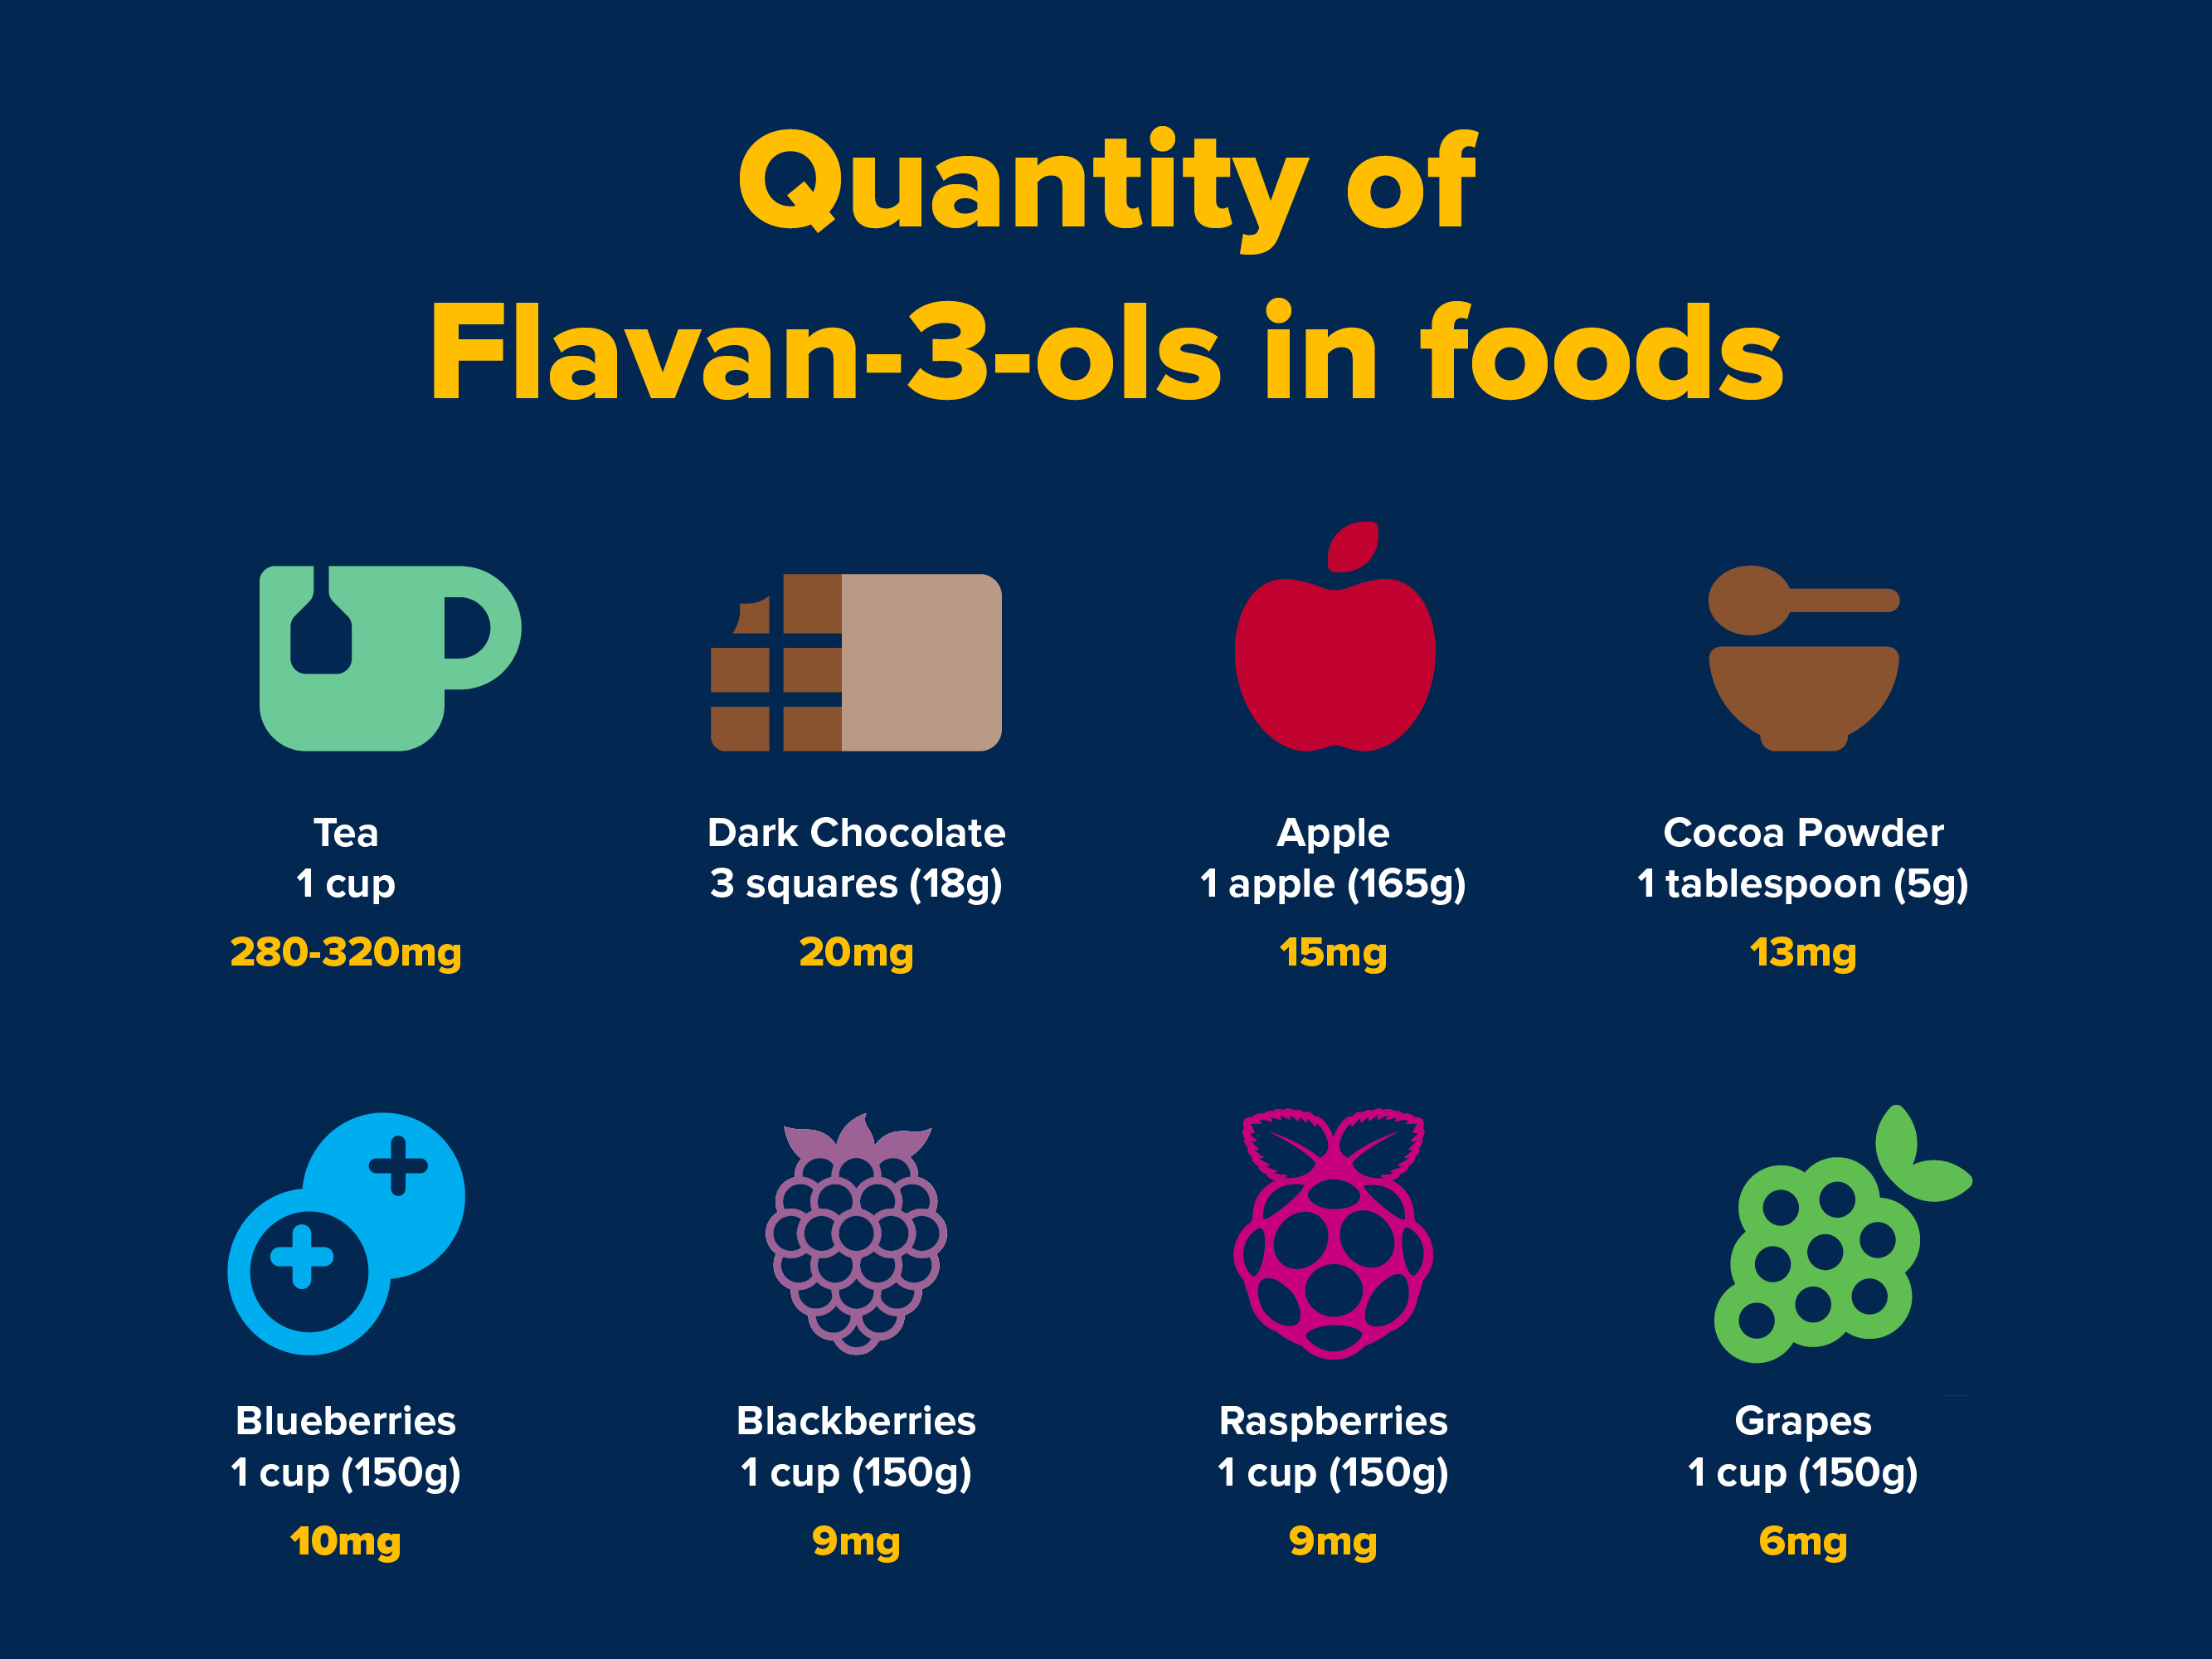 Quality of Flavor-3-ols in foods. 1 cup of brewed tea (280-320 mg); 3 squares of dark chocolate (18g) 20 mg; an apple (165g) (15 mg), 1 tbsp of cocoa powder (13mg); 1 cup of blueberries (150g) (10mg); 1 cup of blackberries (150g) (9mg); 1 cup of raspberries (150g) (9mg); and 1 cup of grapes (150g) (6mg).